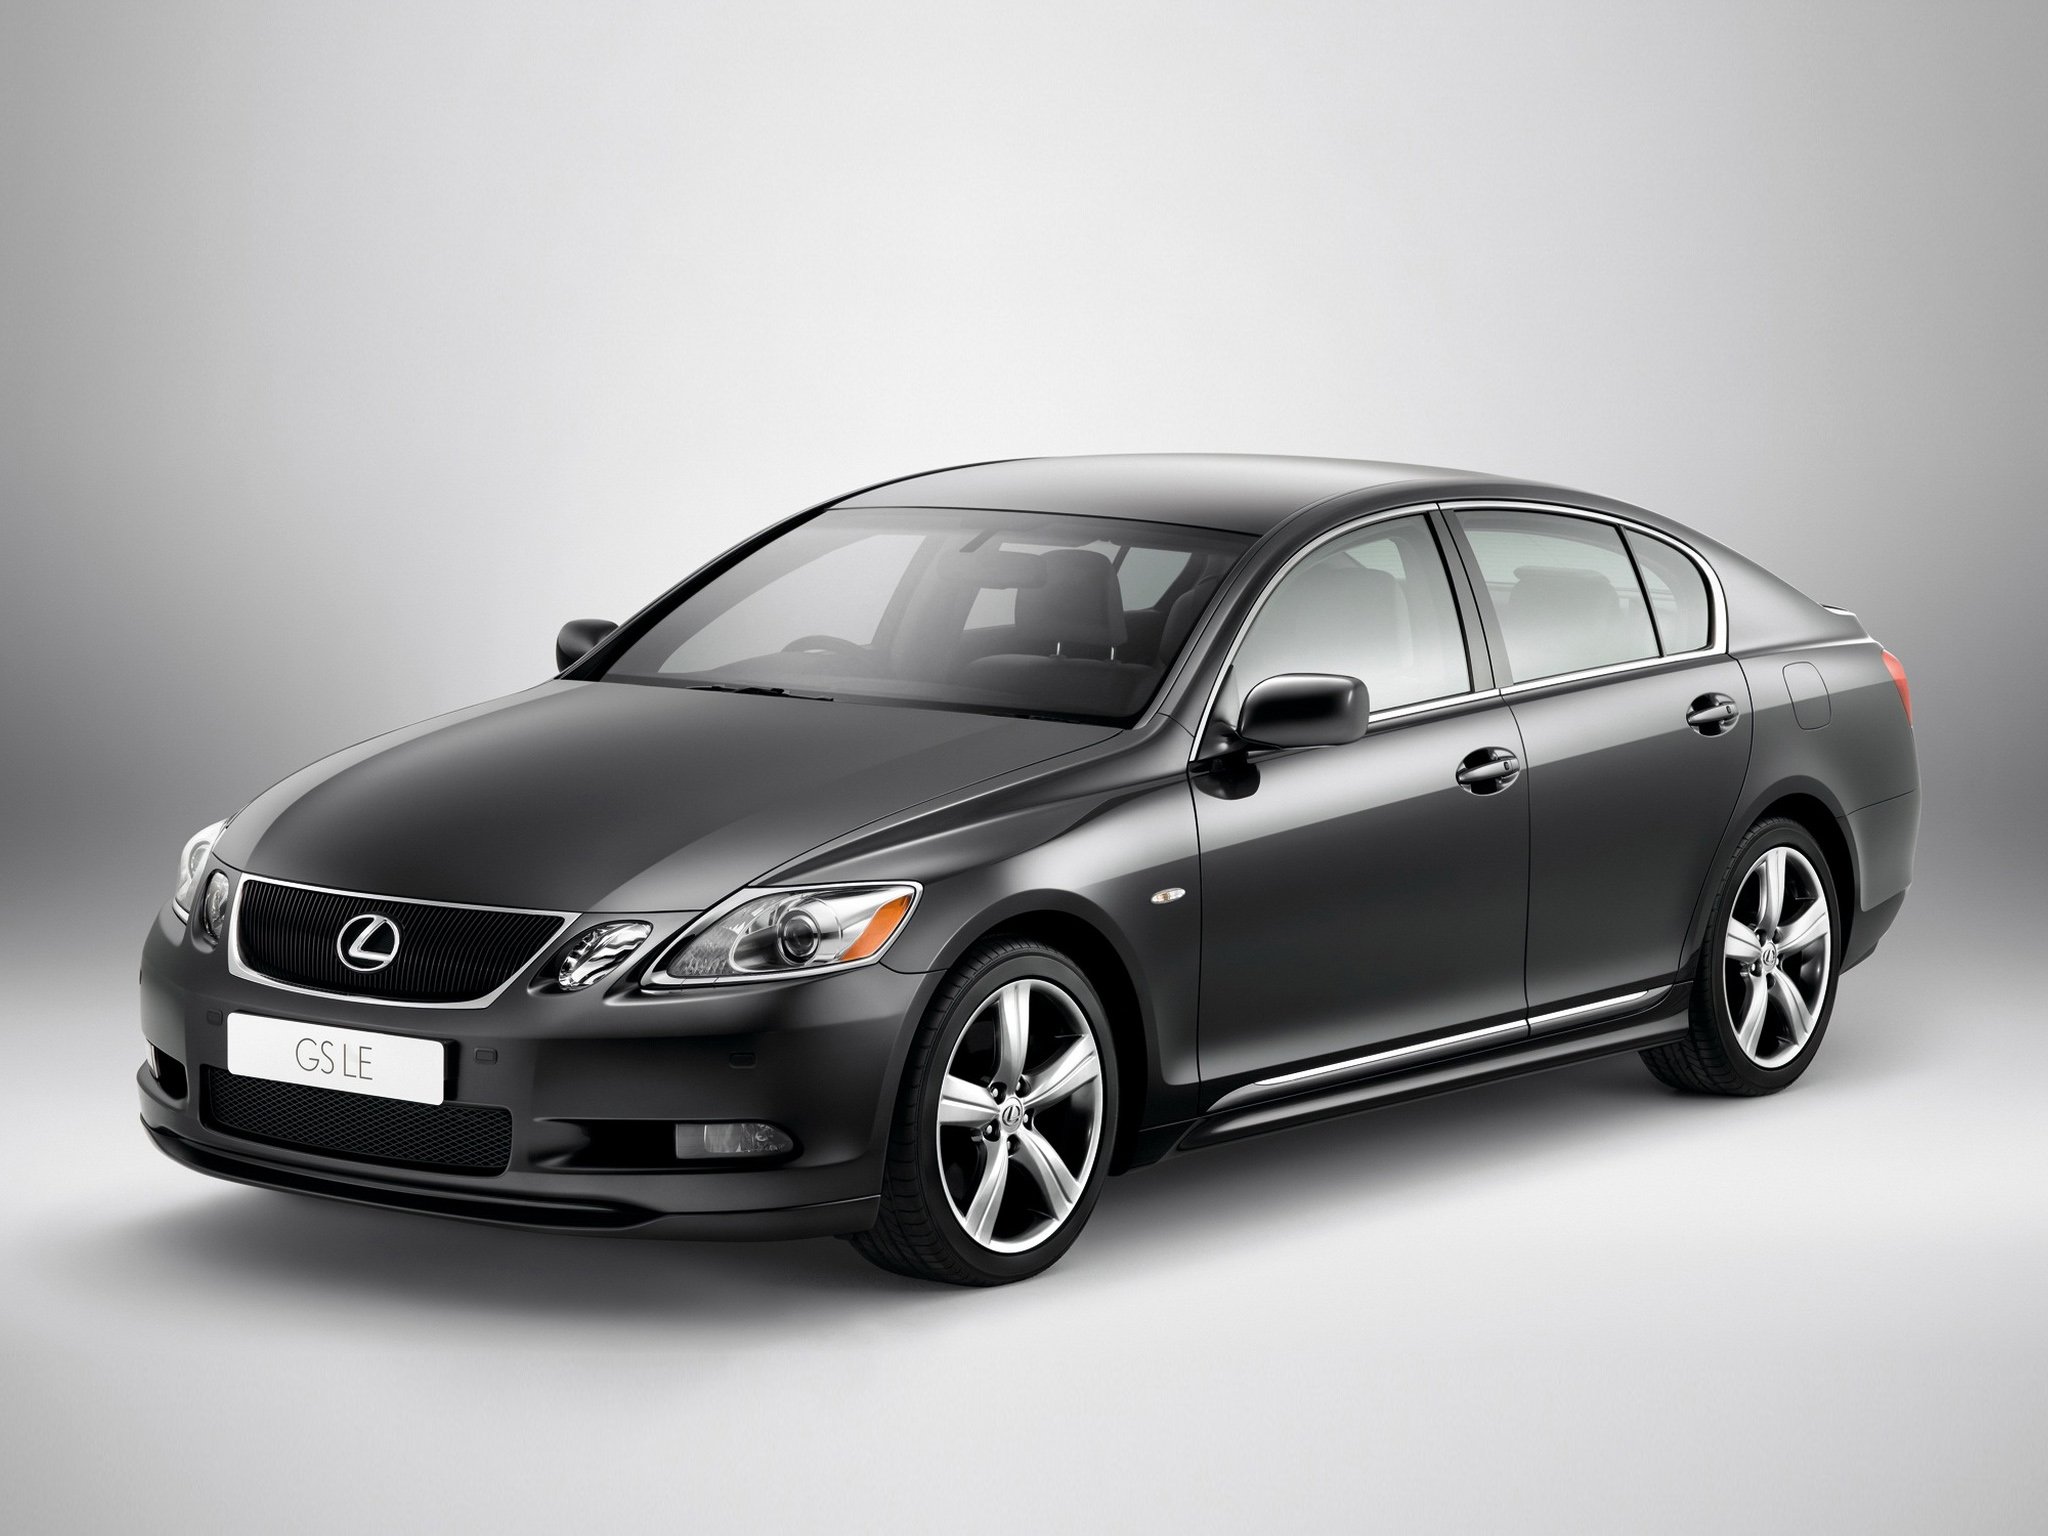 lexus, Gs, Limited, Edition, 2006 Wallpaper HD / Desktop and Mobile Background